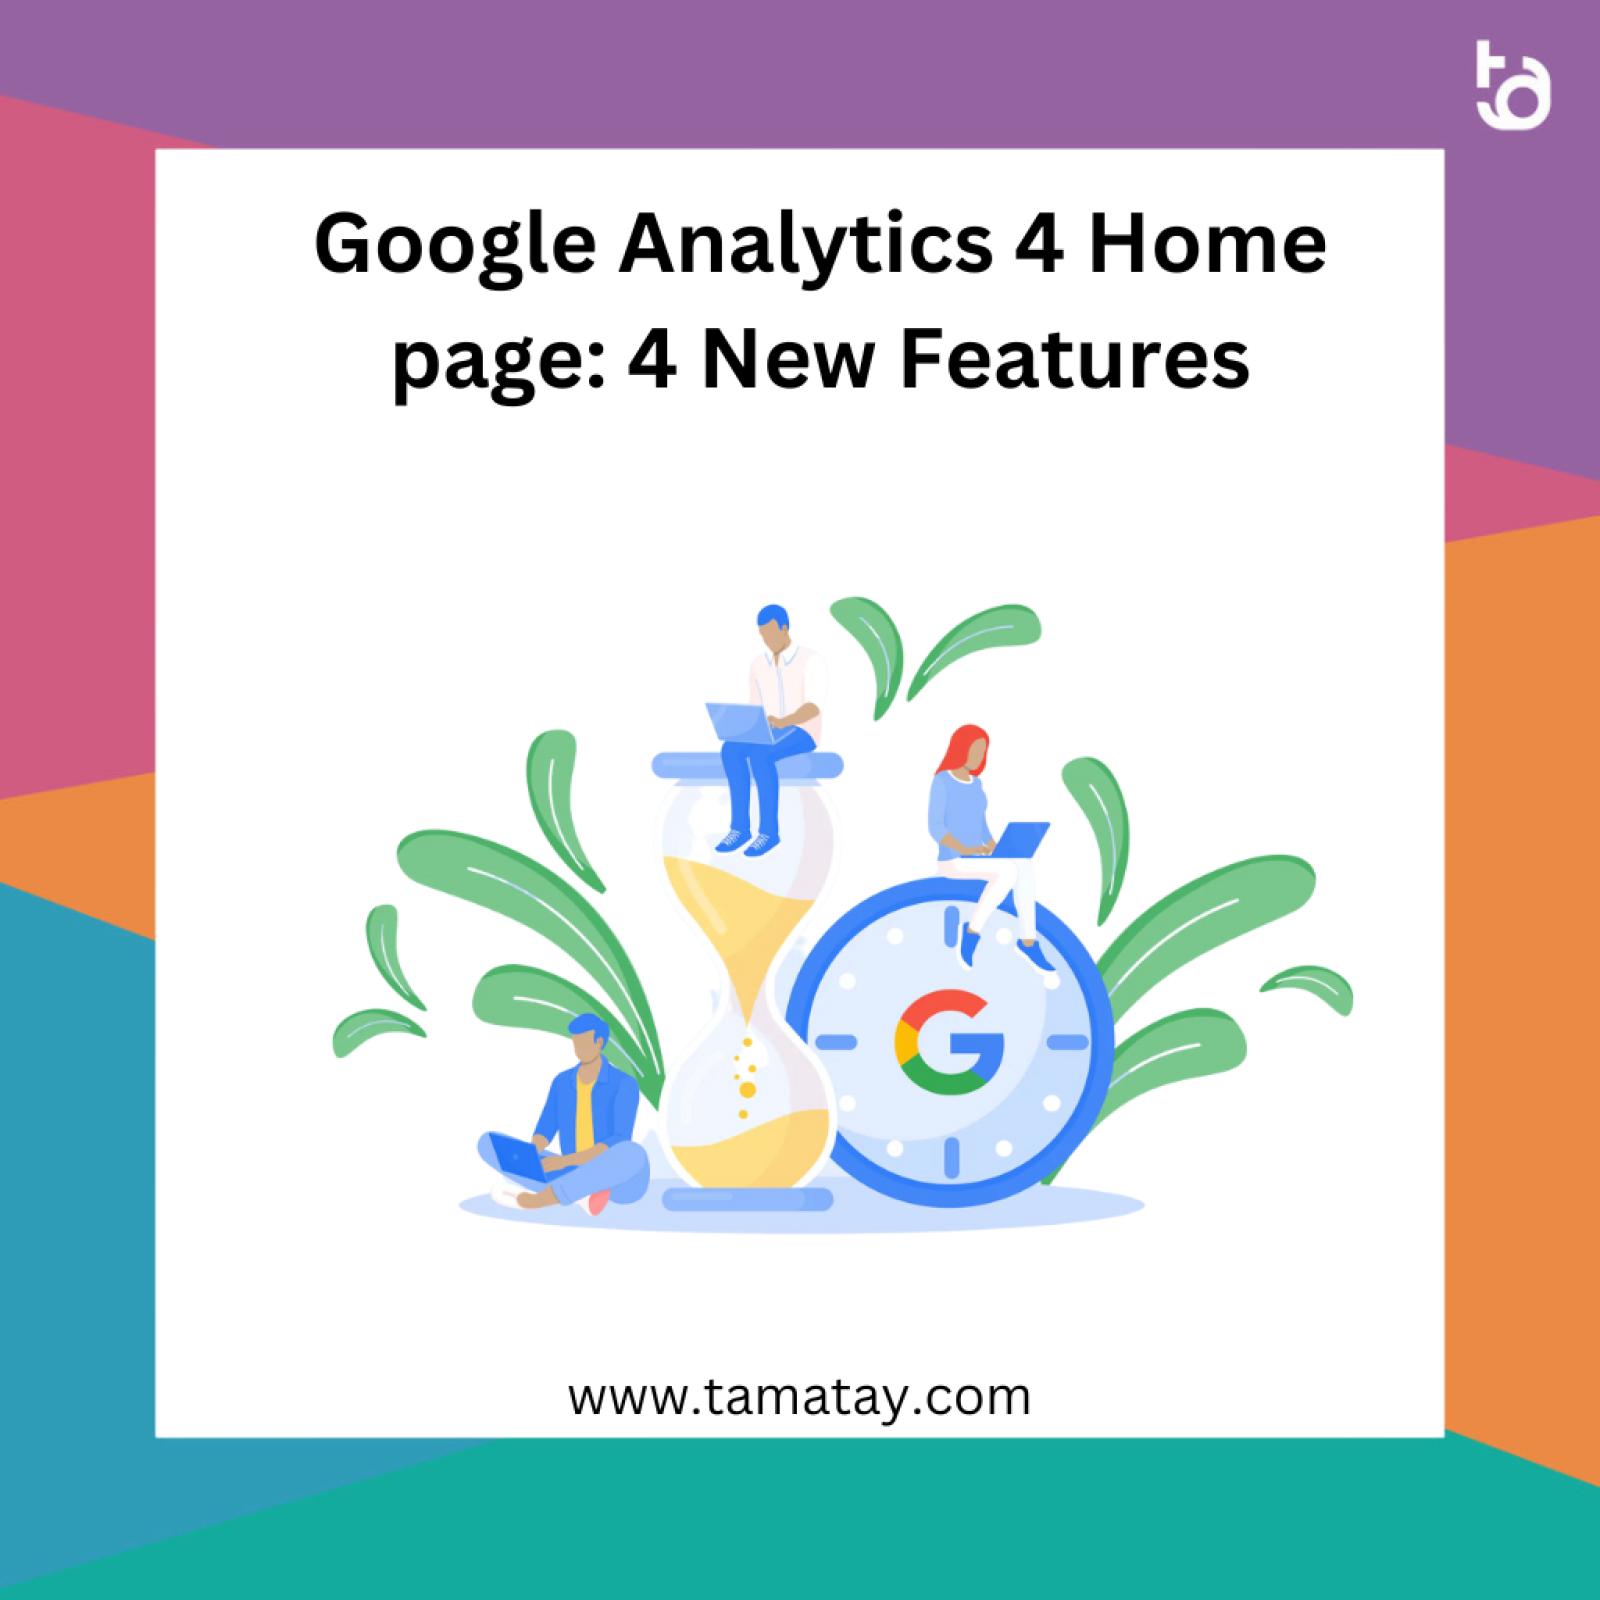 Google Analytics 4 Home page: 4 New Features